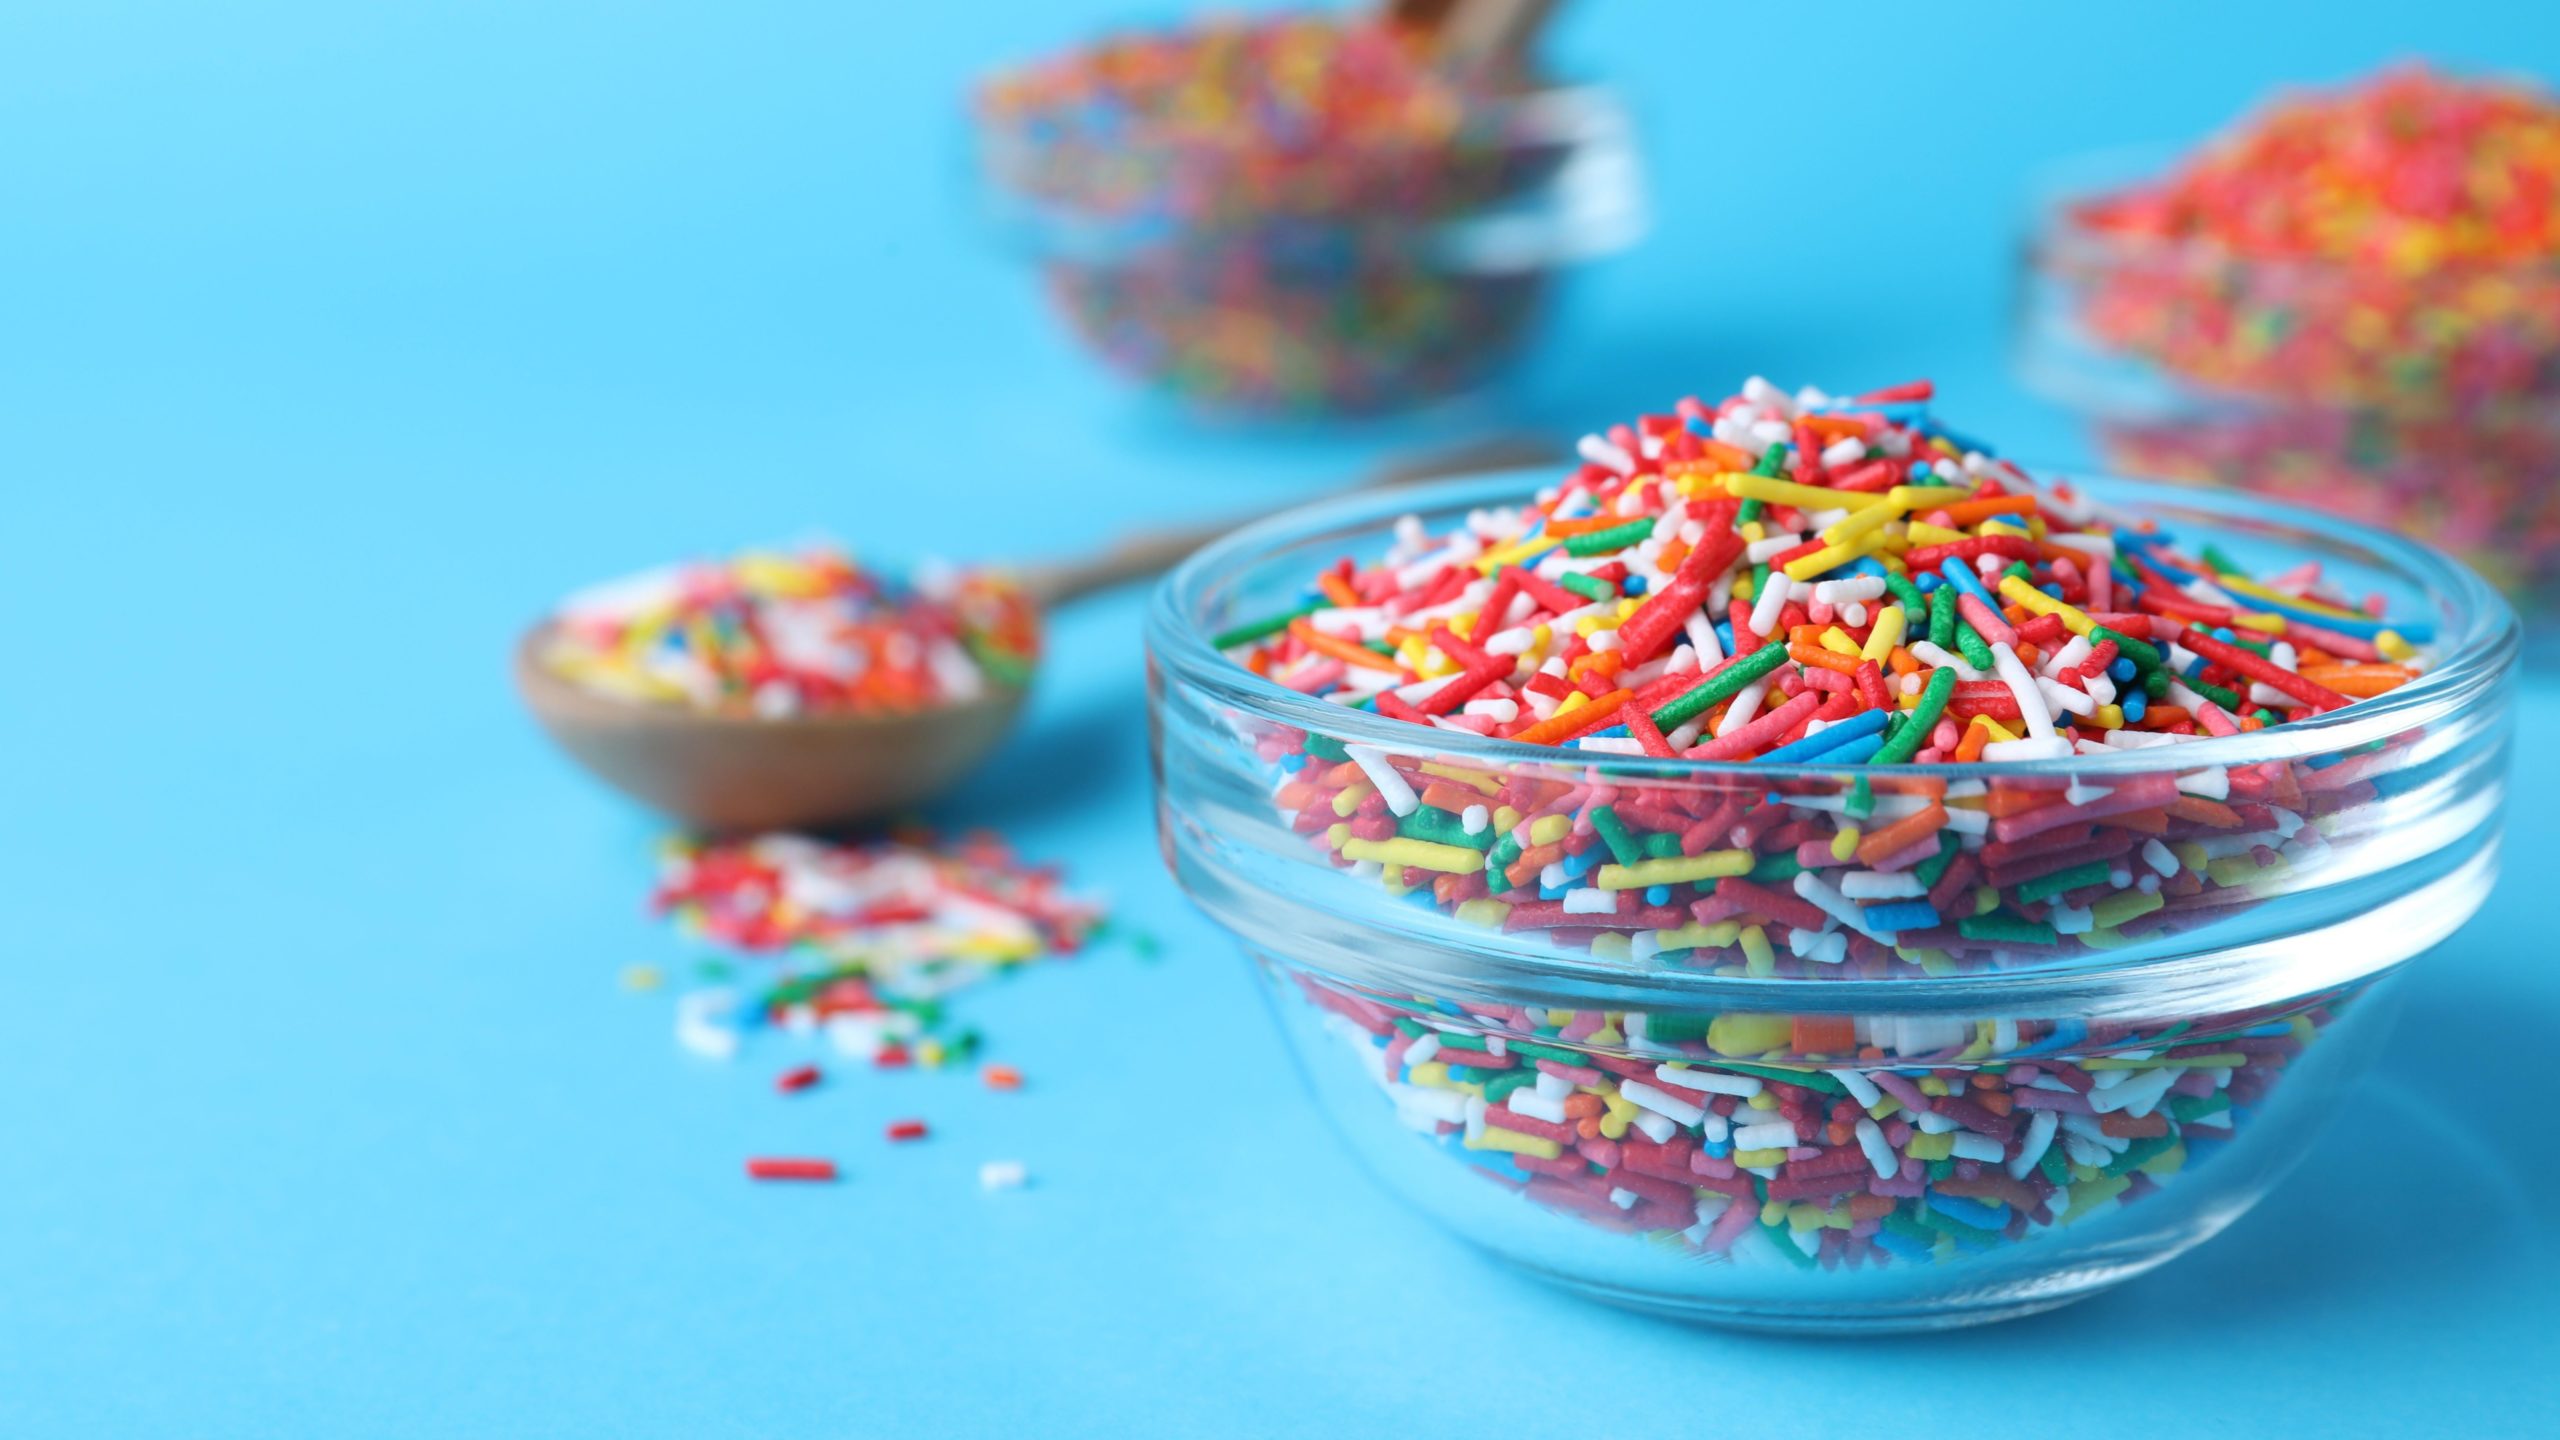 Do Sprinkles, Food Colouring, and Icing Ever Really Expire?